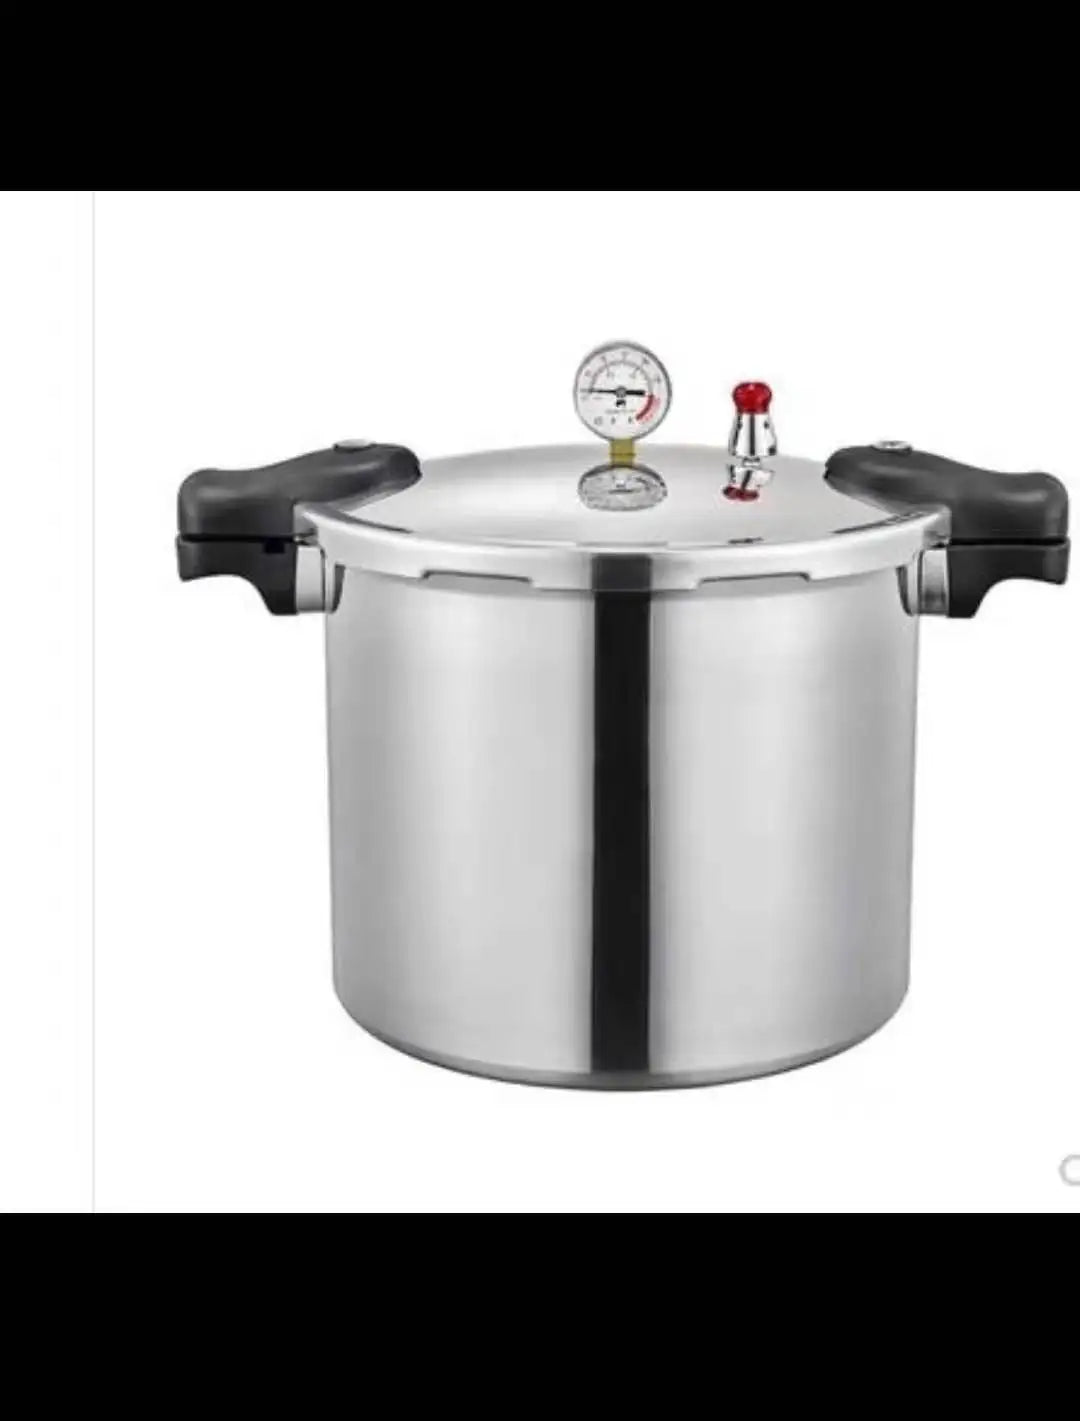 Pressure Cooker Commercial Large Capacity Gas Induction Cooker Universal Hotel Dining Hall Oversized Pressure Cooker